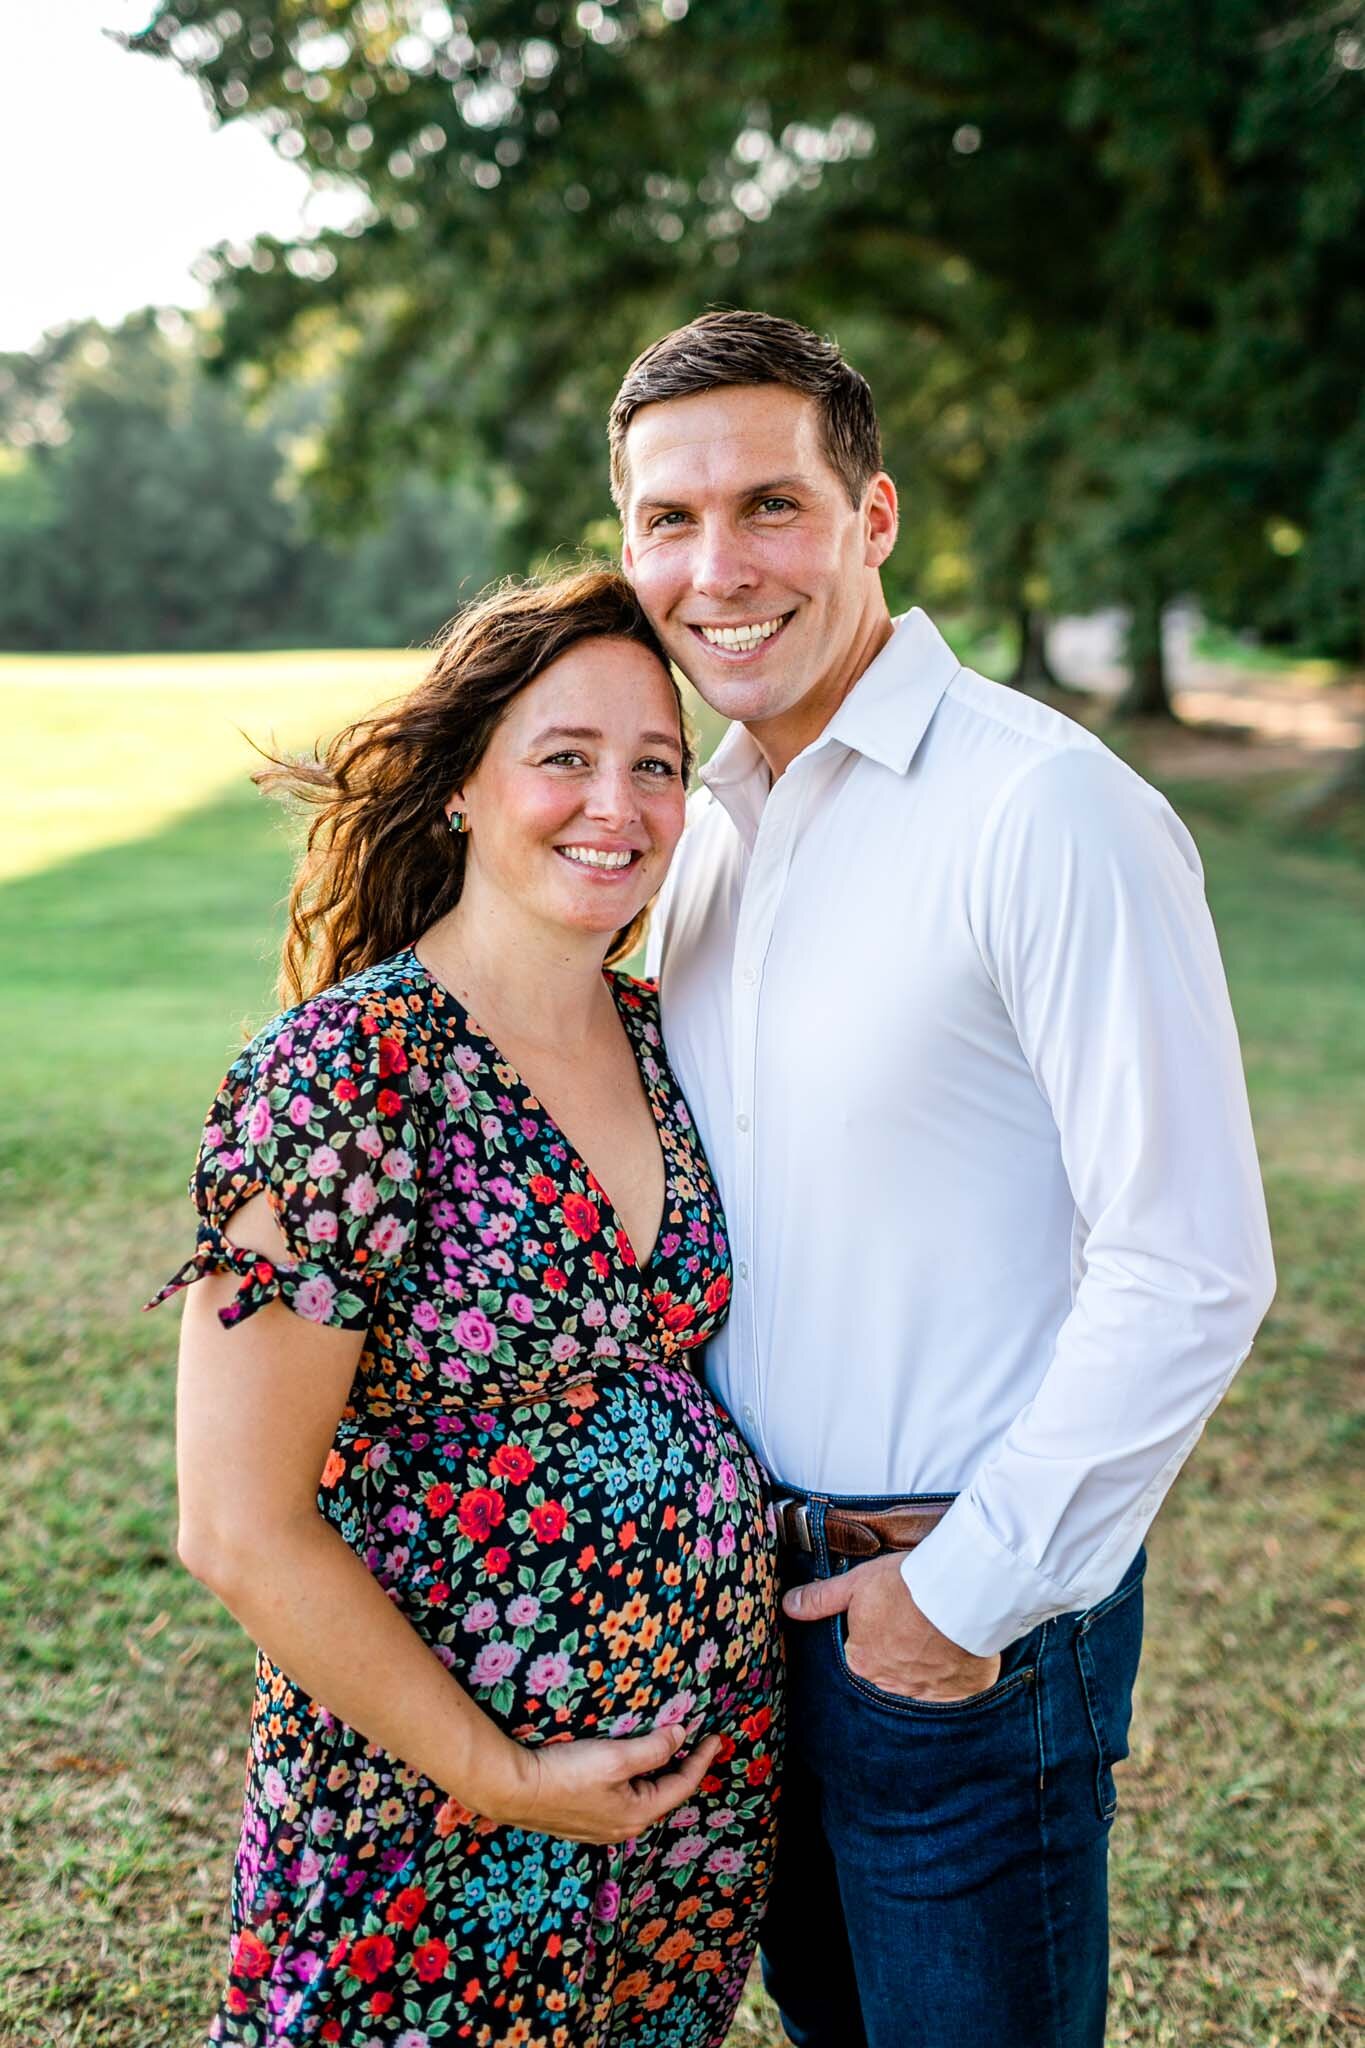 Raleigh Maternity Photographer | Dix Park | By G. Lin Photography | Relaxing portrait of man and pregnant woman